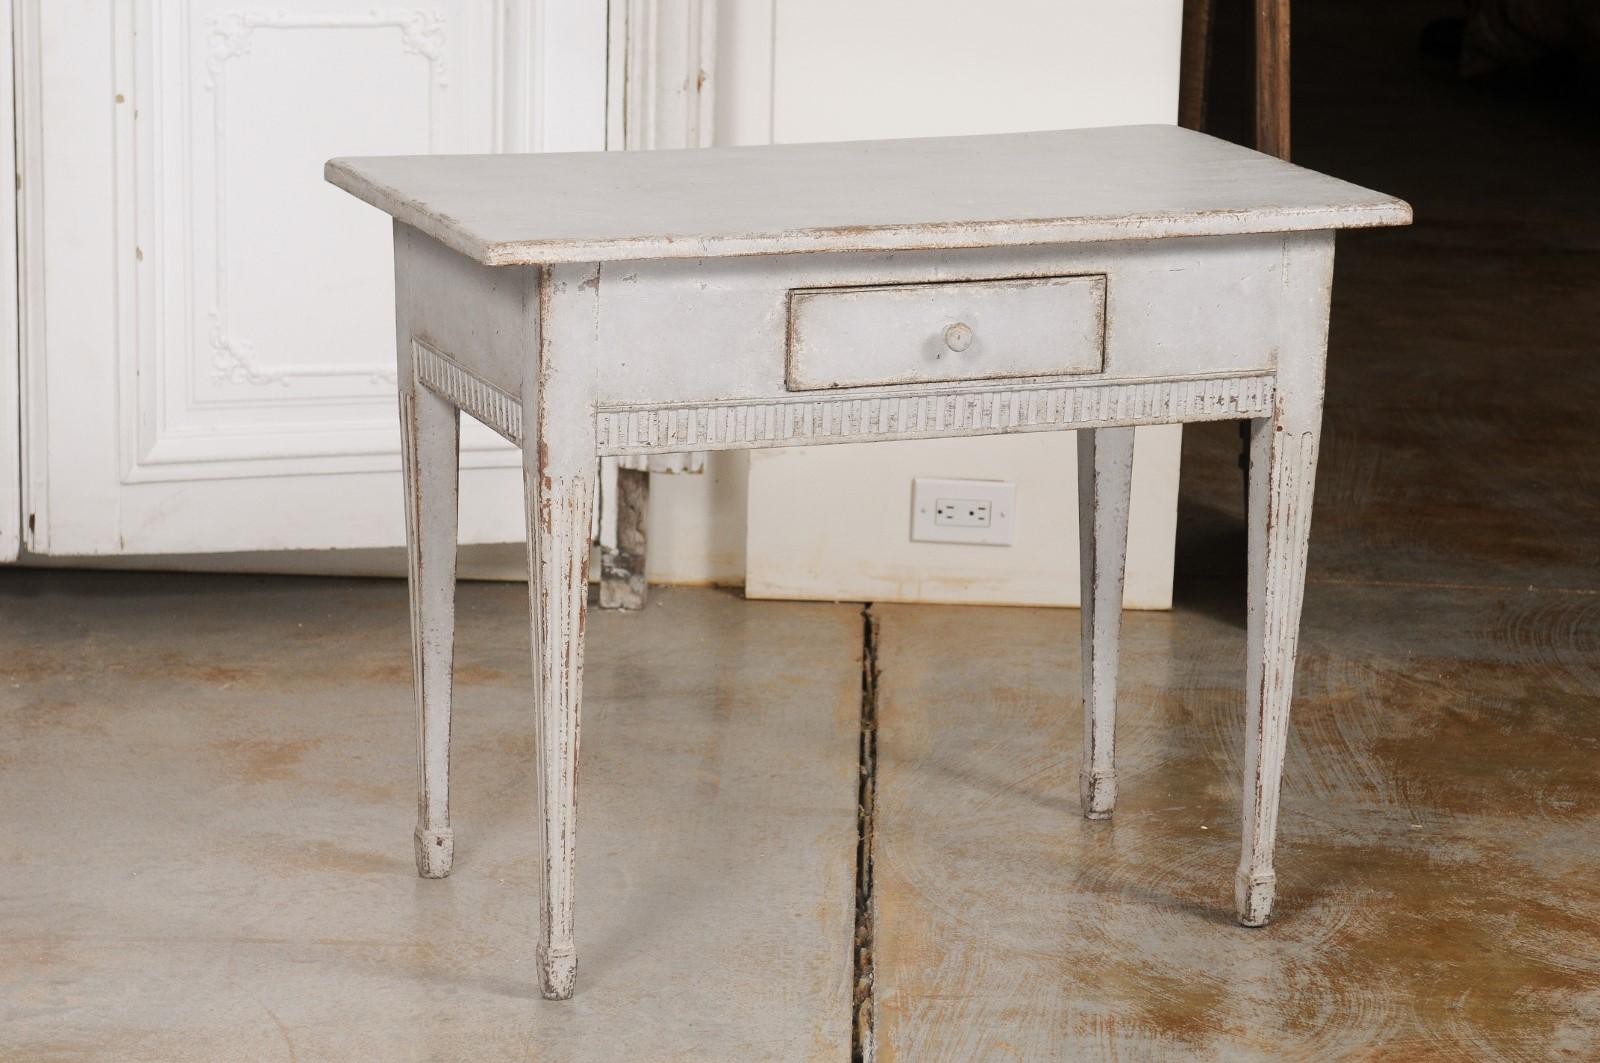 A Swedish Gustavian period freestanding painted console table from the late 18th century, with single drawer, fluted accents and tapered legs. Created in Sweden during the last decade of the 18th century, this painted table features a rectangular